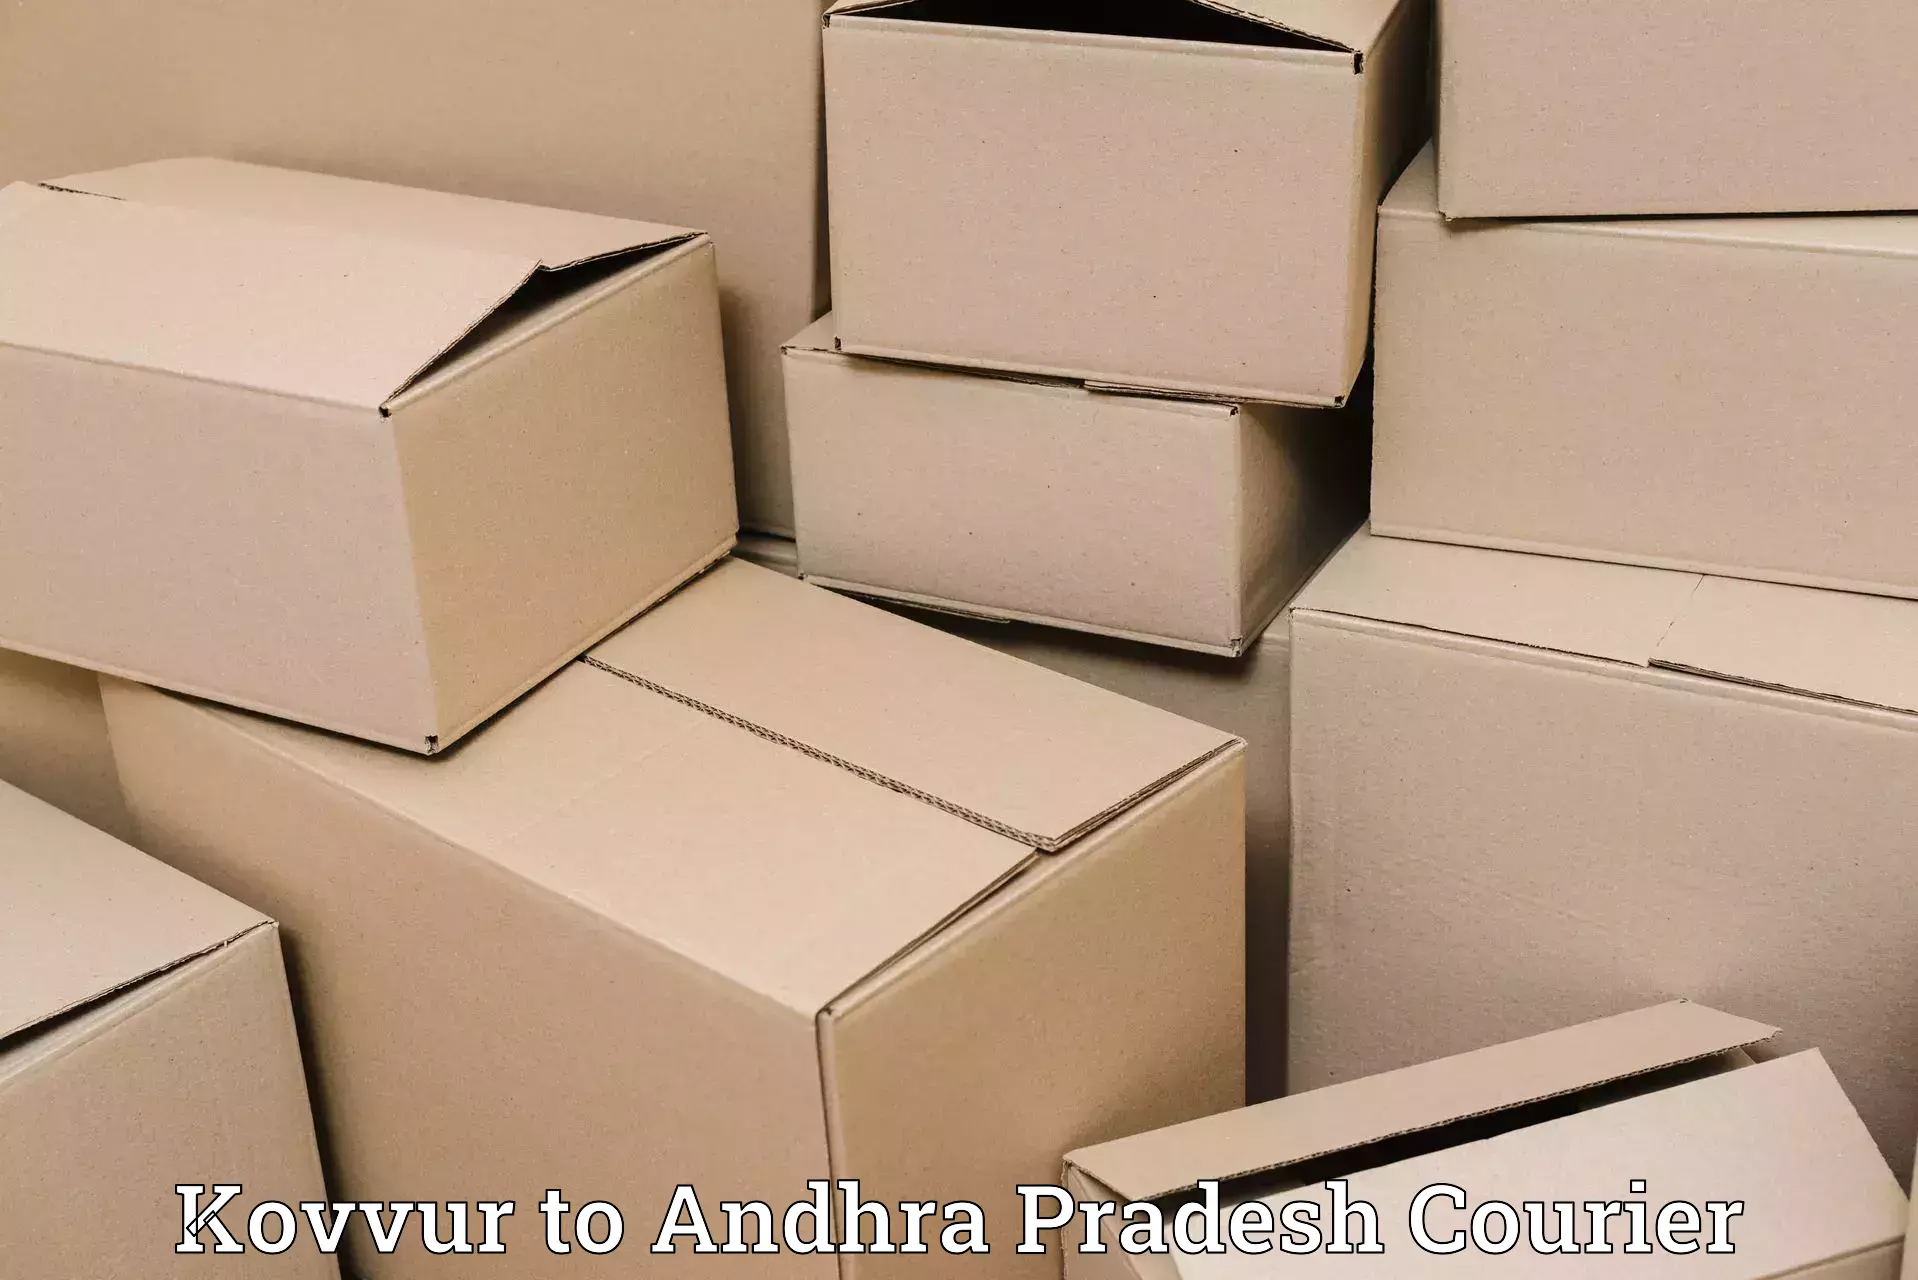 Discount courier rates Kovvur to Andhra Pradesh